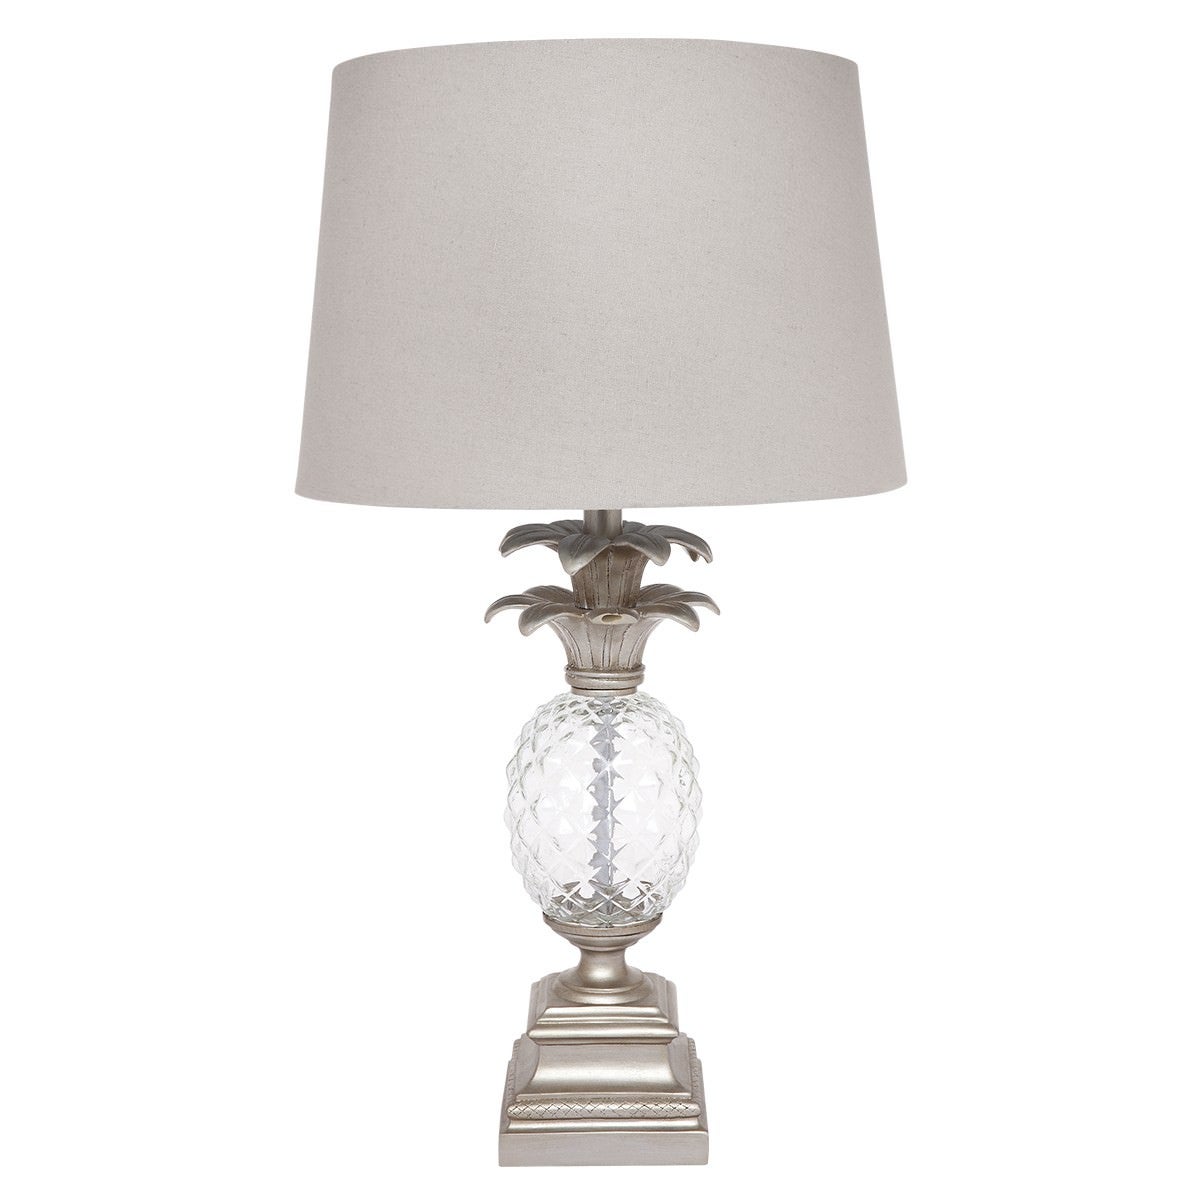 Langley Cut Glass Pineapple Base Table Lamp , Antique Silver